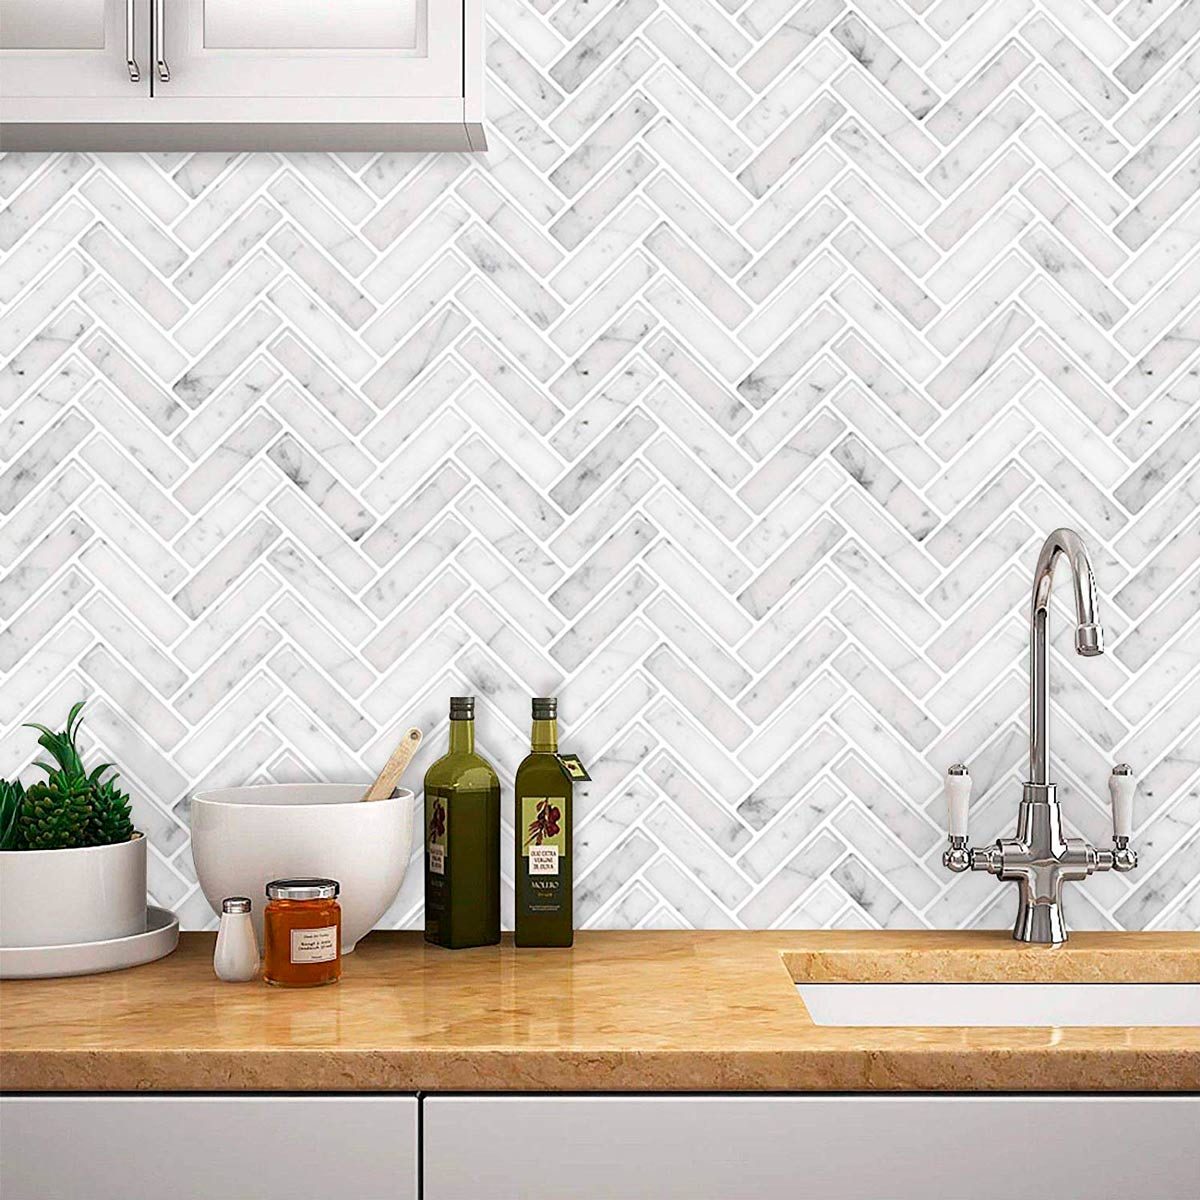 What You Need to Know About Peel-and-Stick Tile | Family Handyman